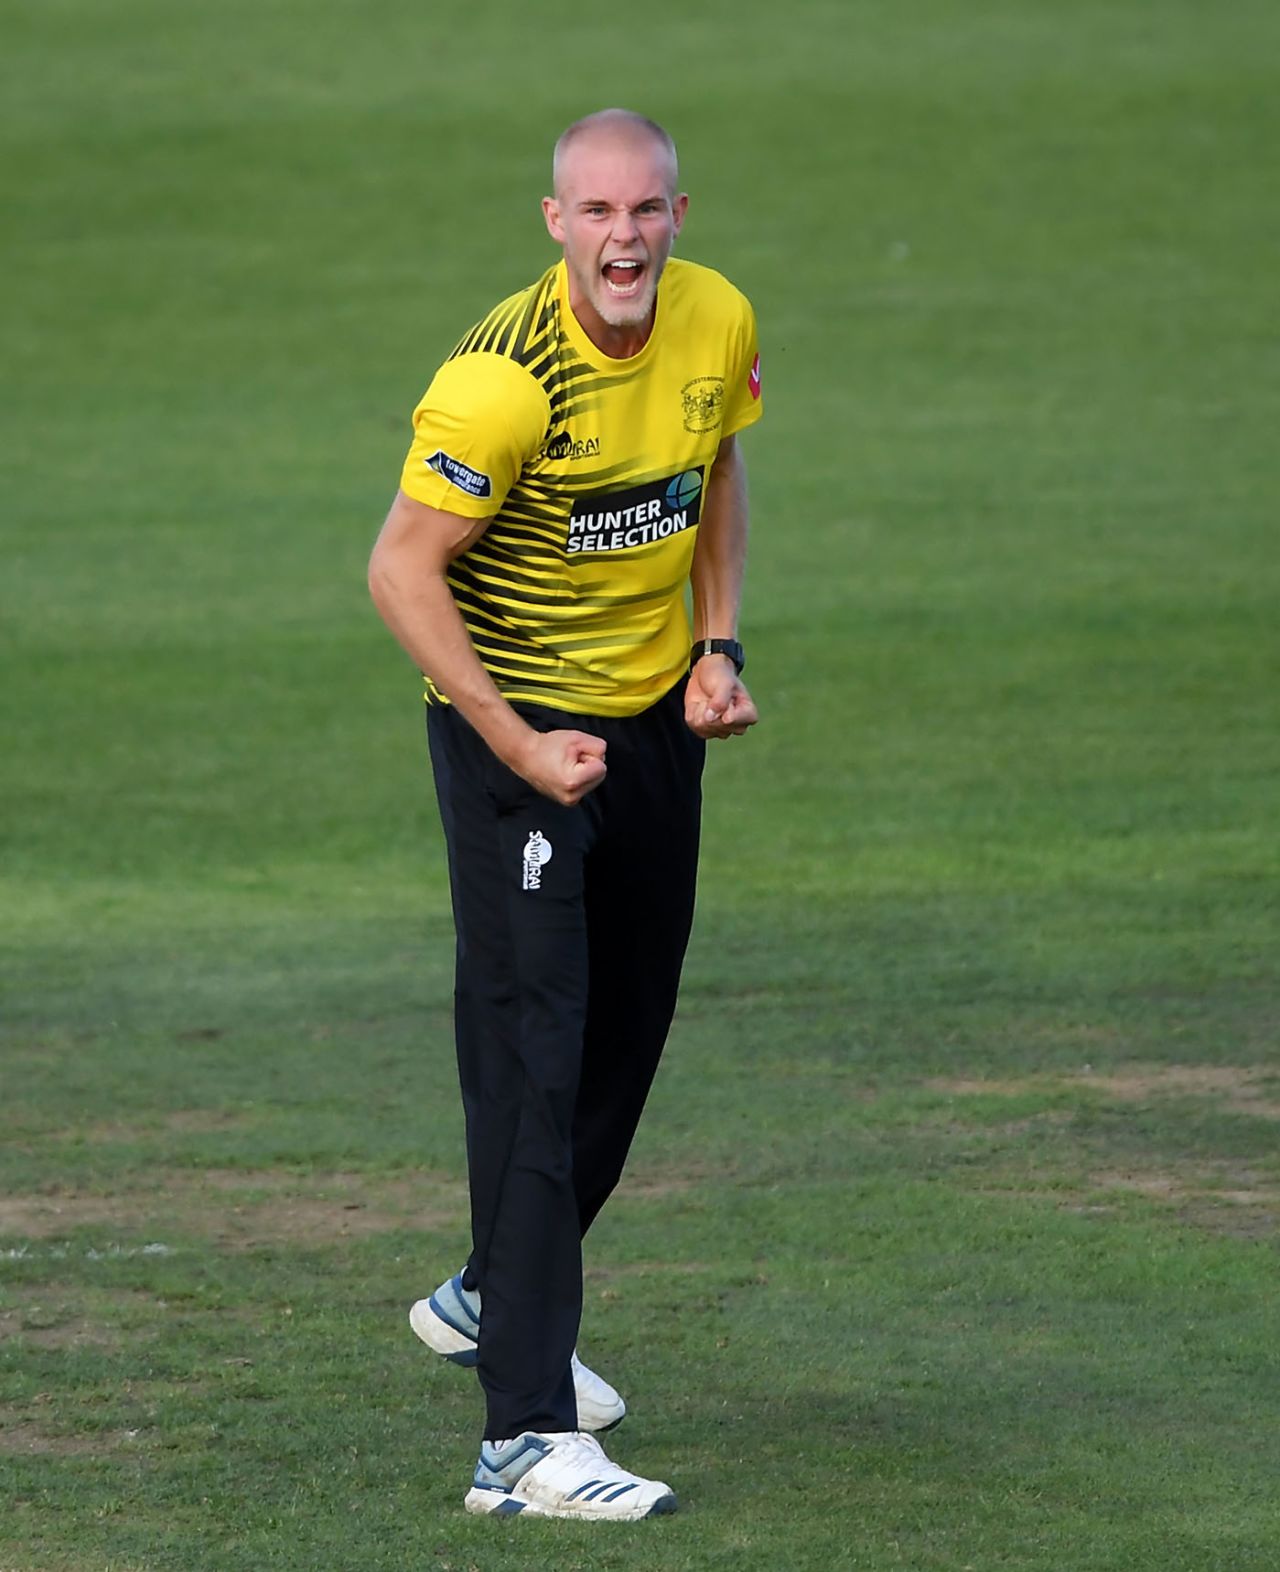 Zak Chappell was fired up, Gloucestershire v Hampshire, Bristol, August 13, 2019